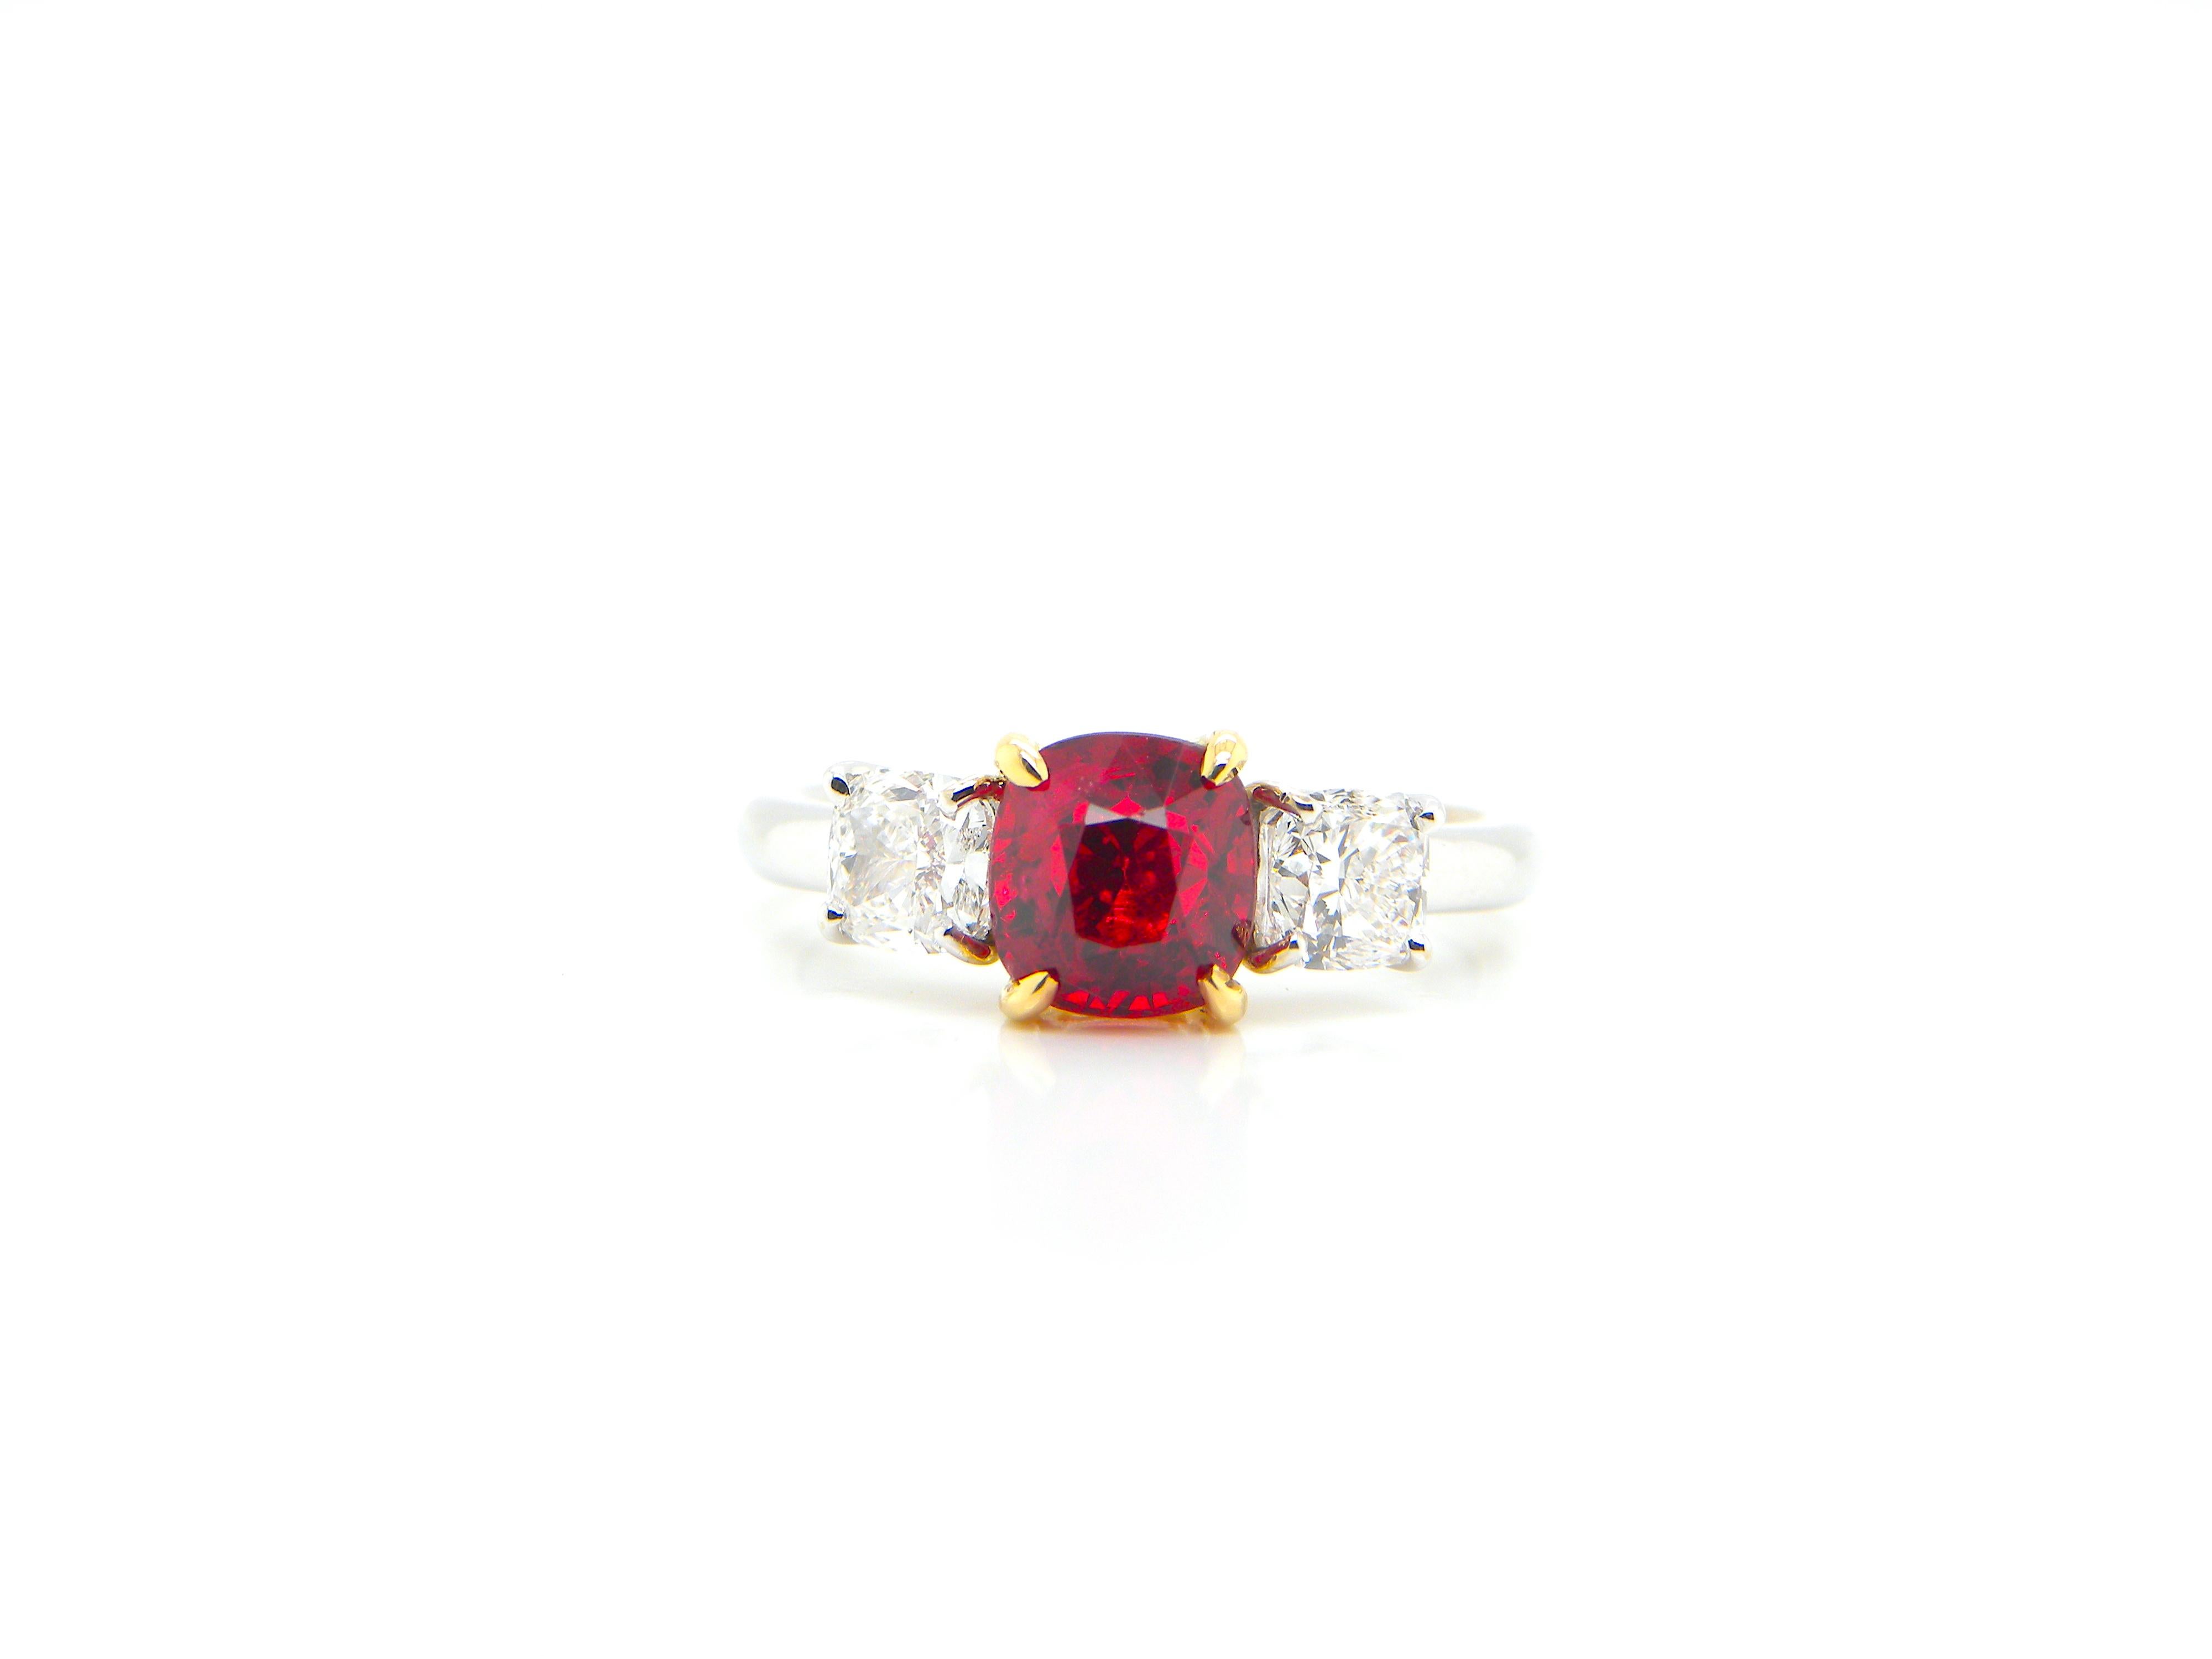 Cushion Cut 2.02 Carat GRS Certified Burma No Heat Vivid Red Spinel and White Diamond Ring